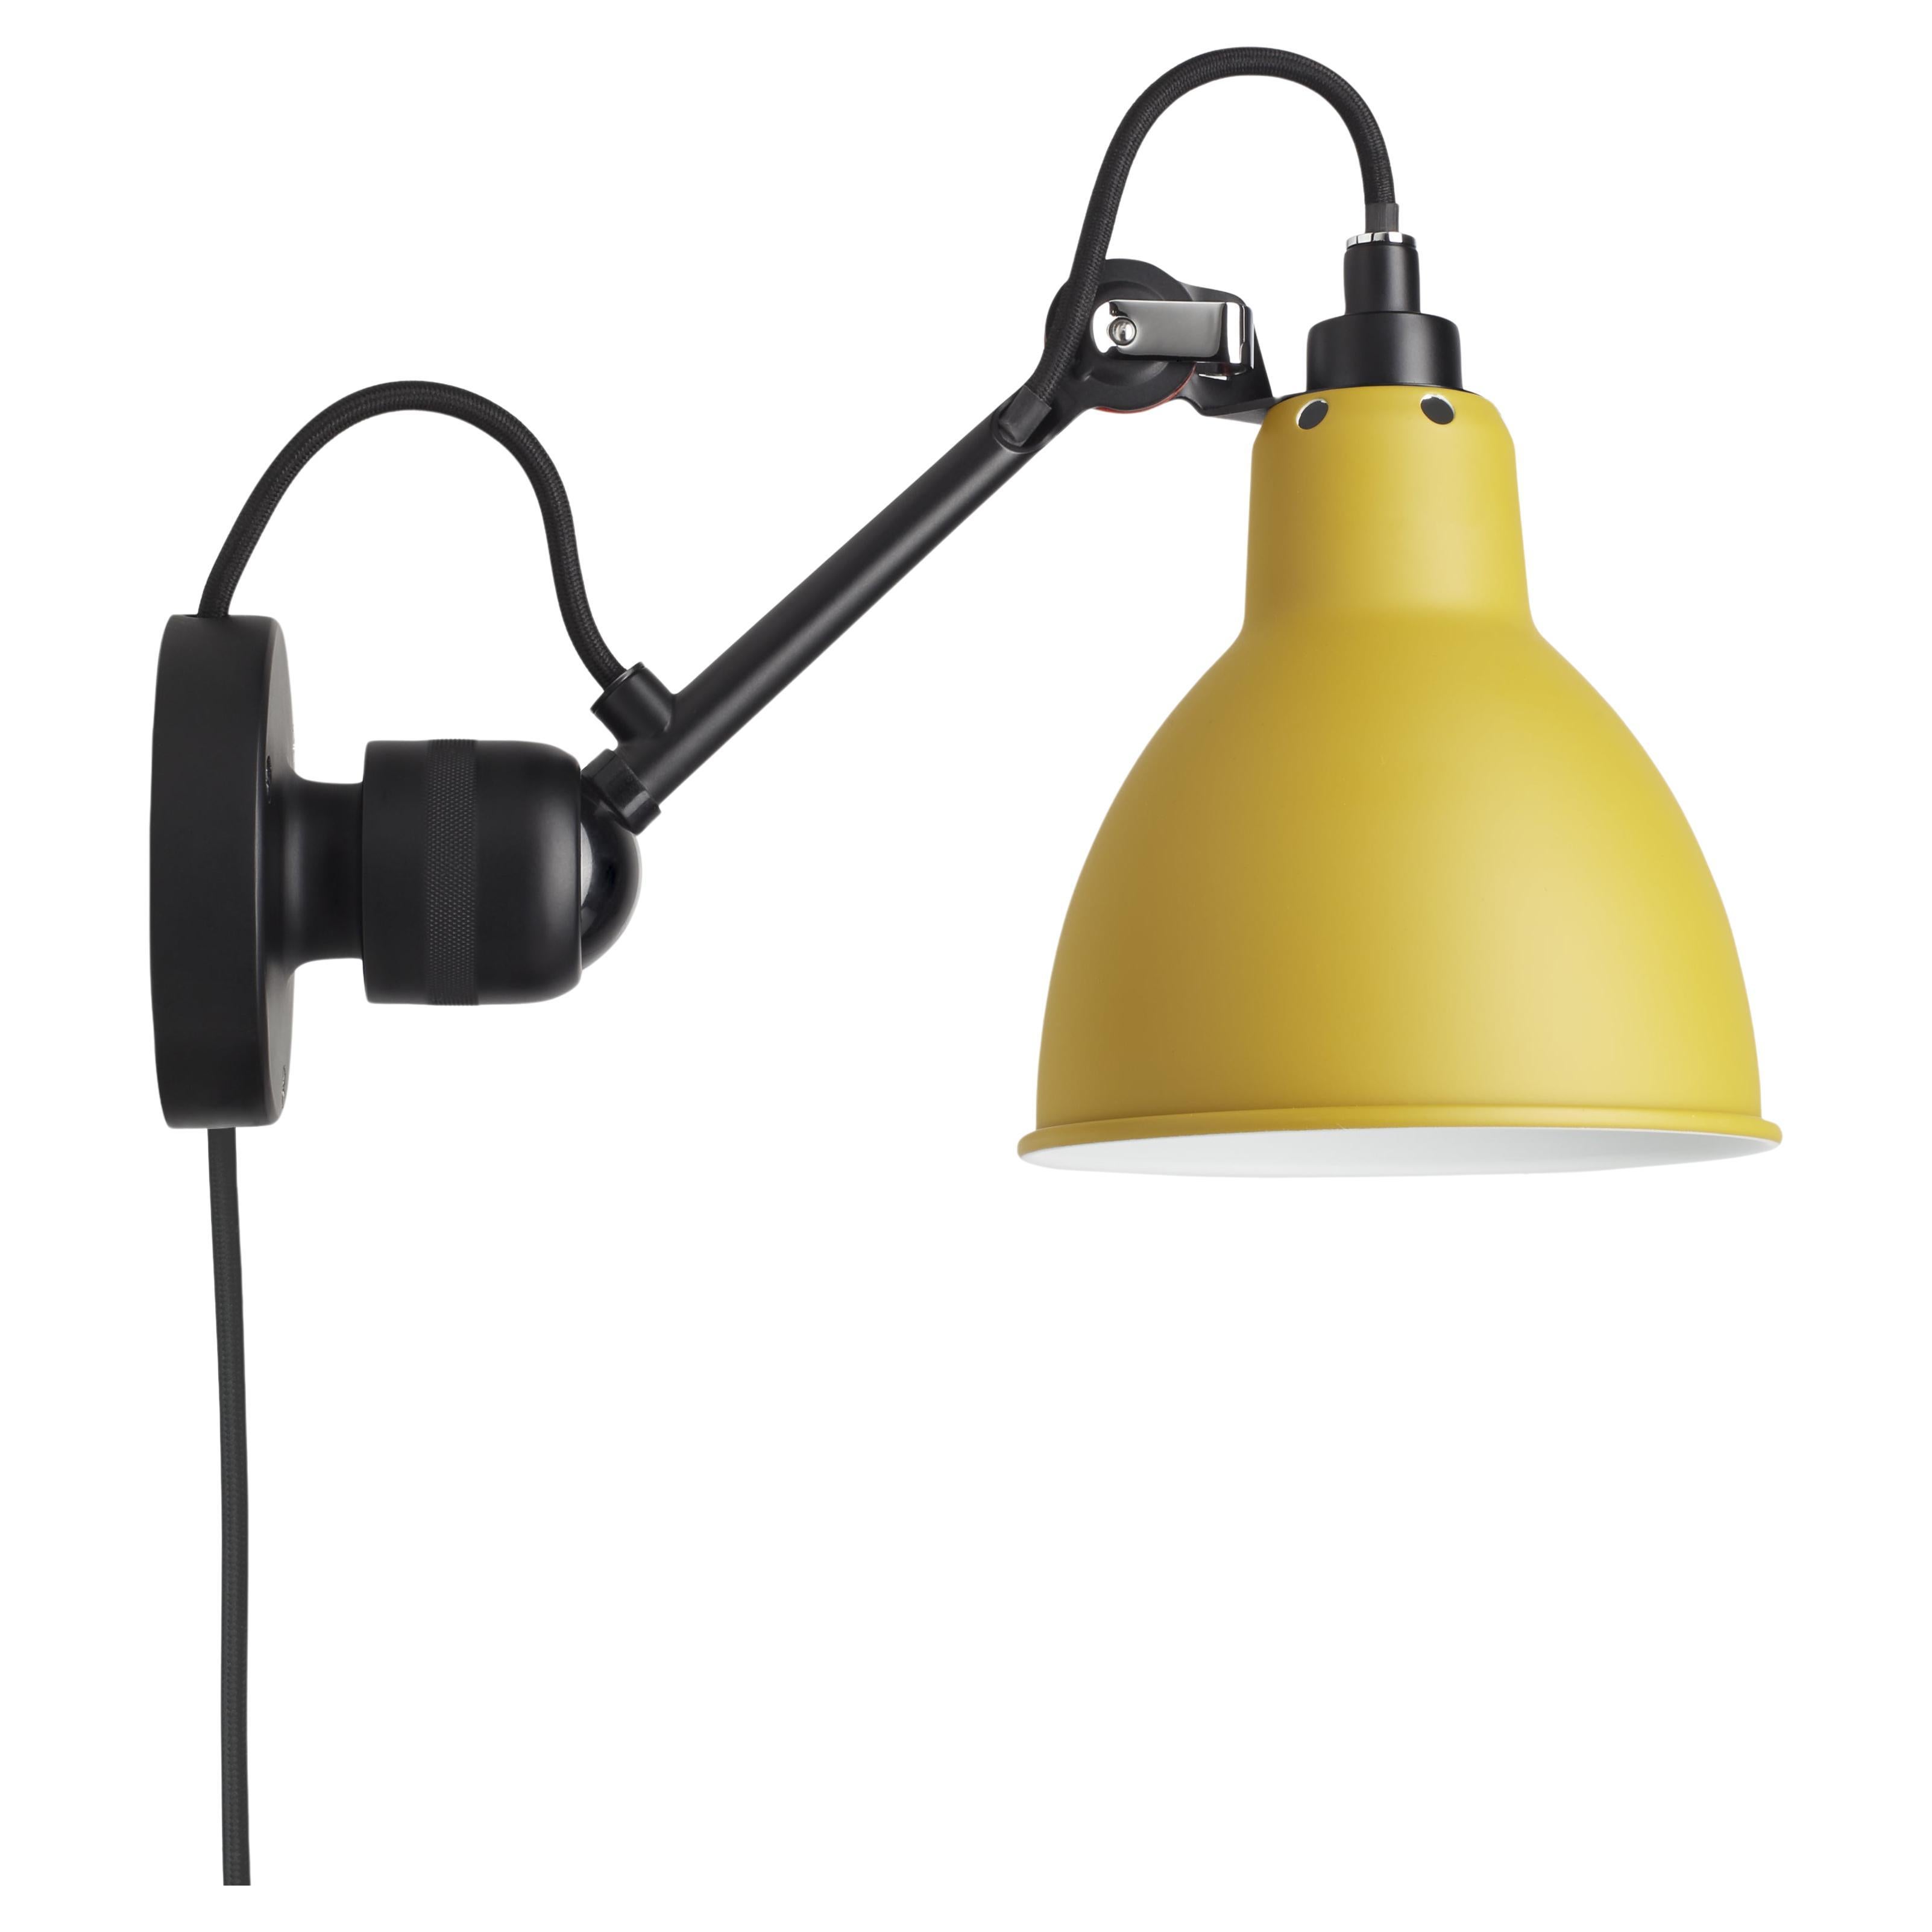 DCW Editions La Lampe Gras N°304 CA Wall Lamp in Black Arm and Yellow Shade